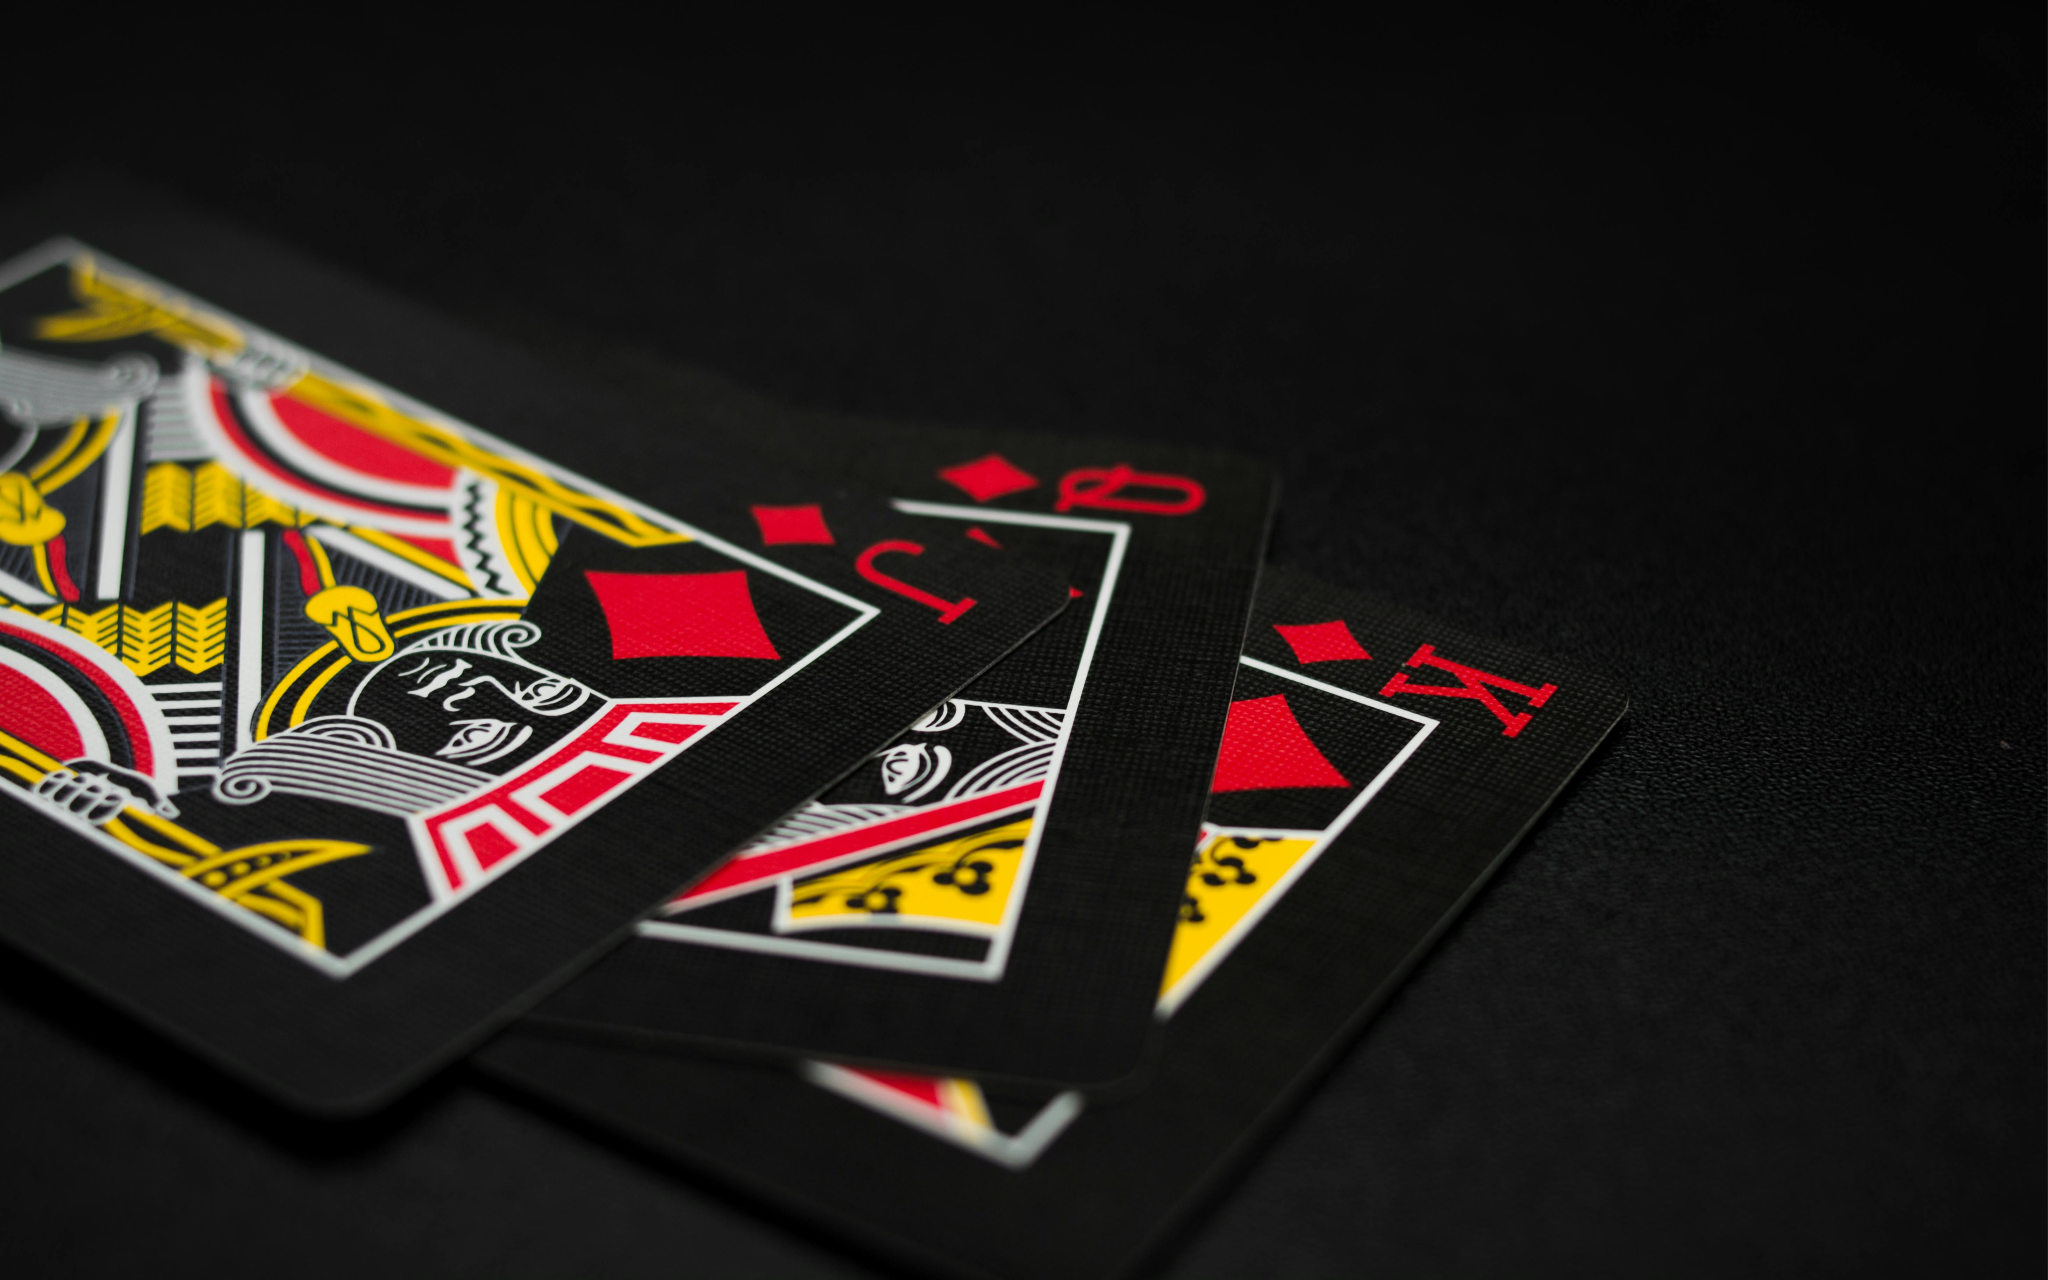 13 Best Blackjack Books to Help You Deal Yourself a Winning Hand